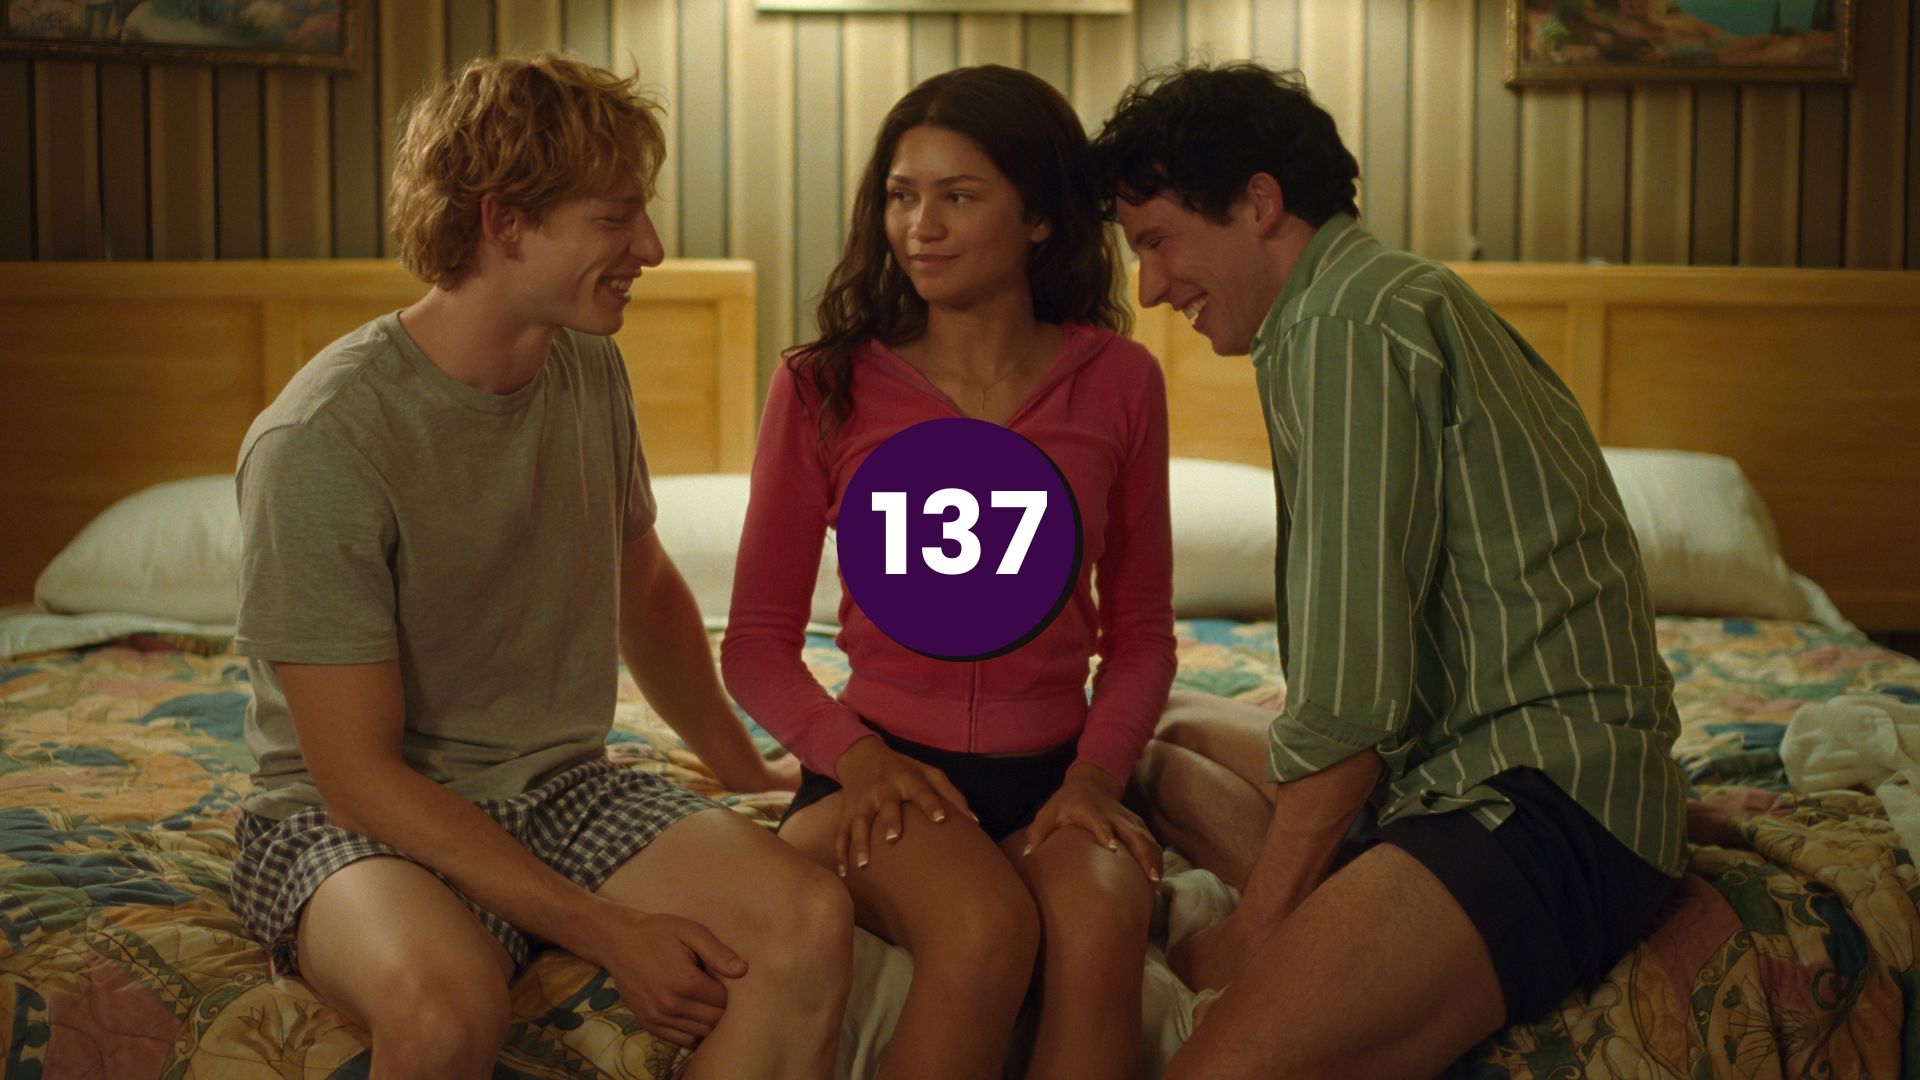 Still from Luca Guadagnino's film Challengers, featuring (left to right) Mike Faist, Zendaya, and Josh O'Connor, which we discuss on the podcast. Photo courtesy of MGM Studios. 